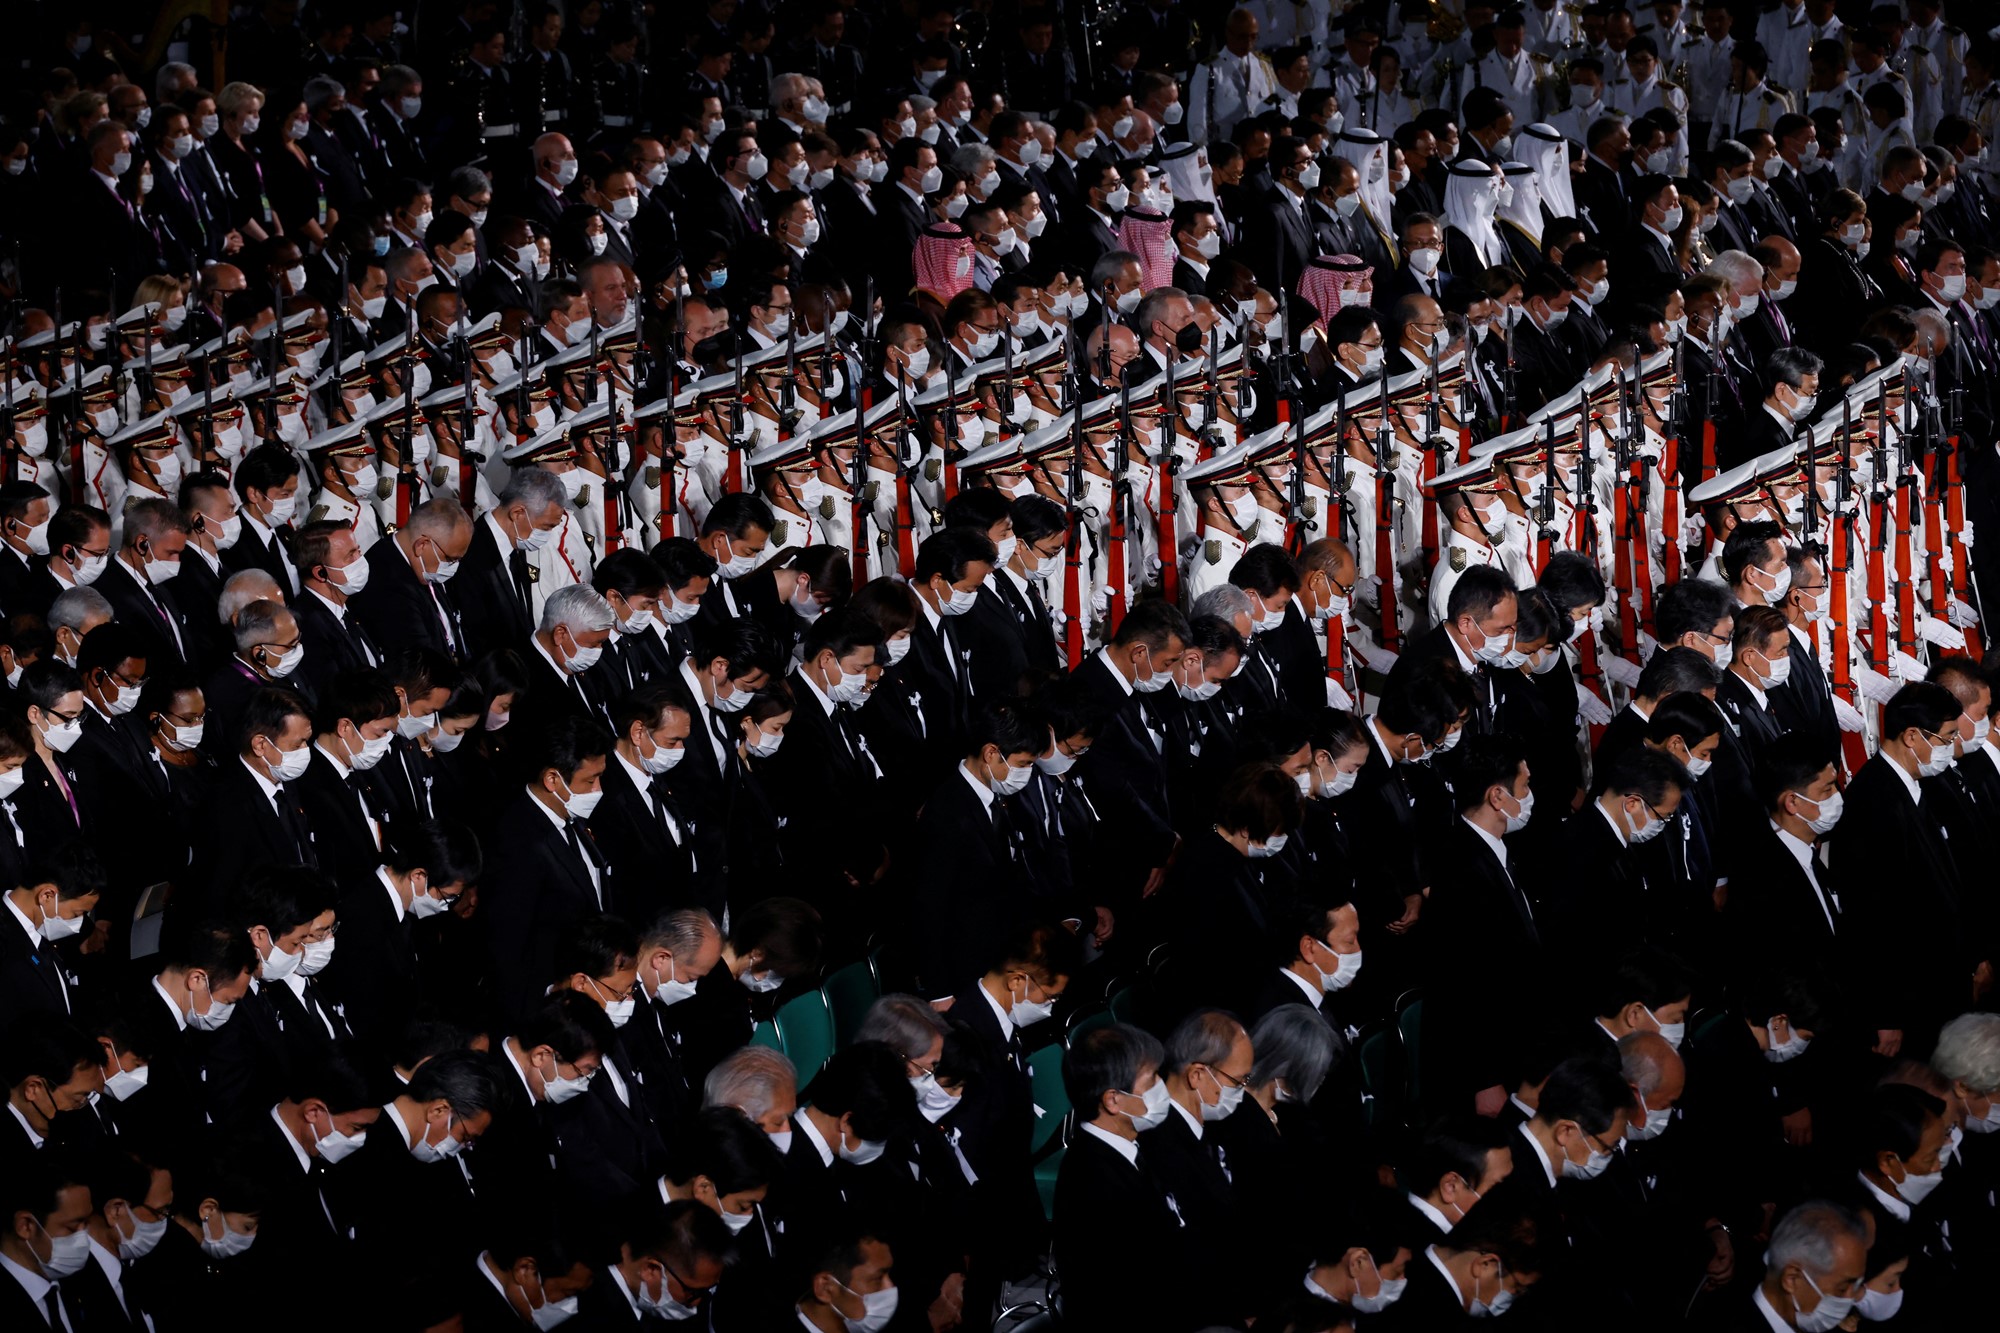 Attendees observe a moment of silence during a state funeral for former Japanese Prime Minister Shinzo Abe